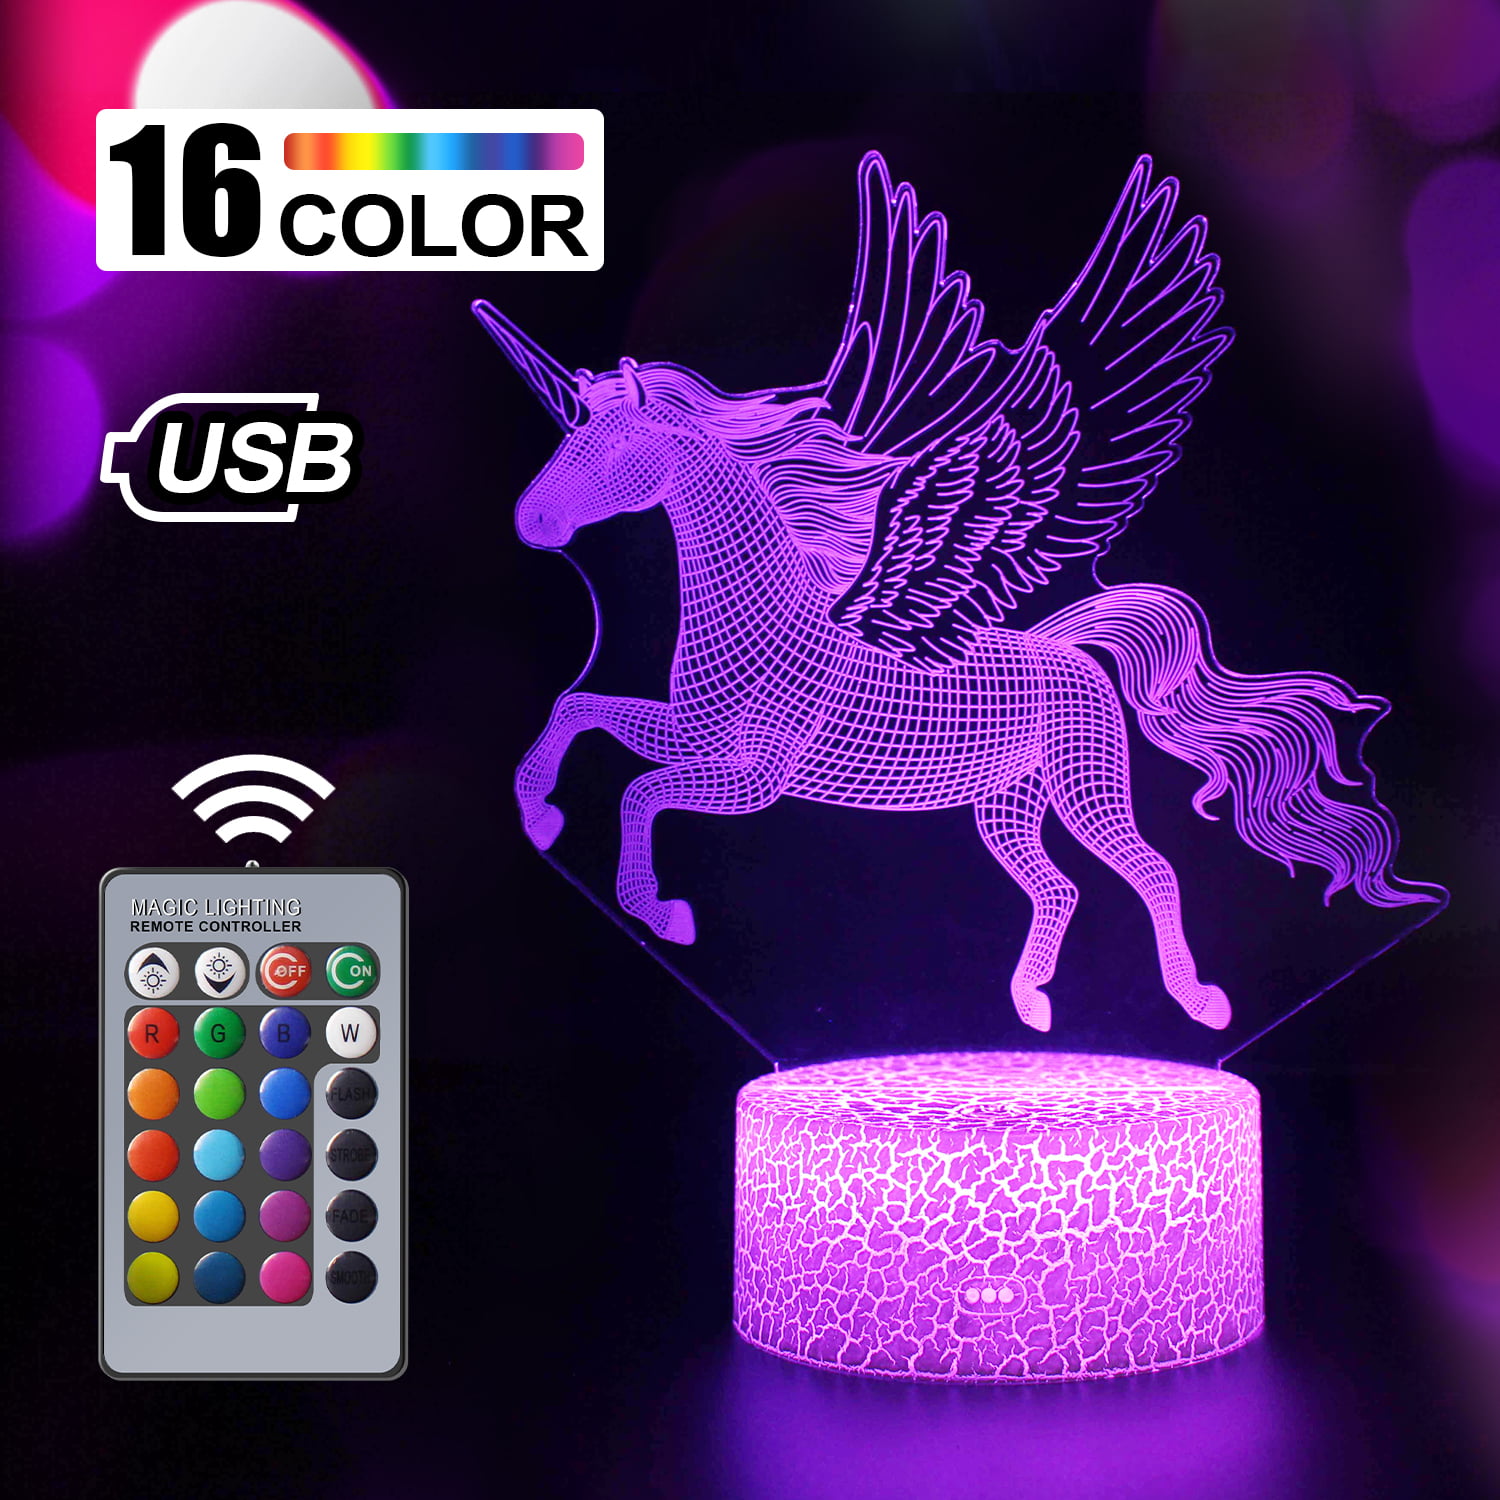 USB Unicorn Night Lights Remote Touch 3D LED Optical Illusion Lamp for Kids Gift 